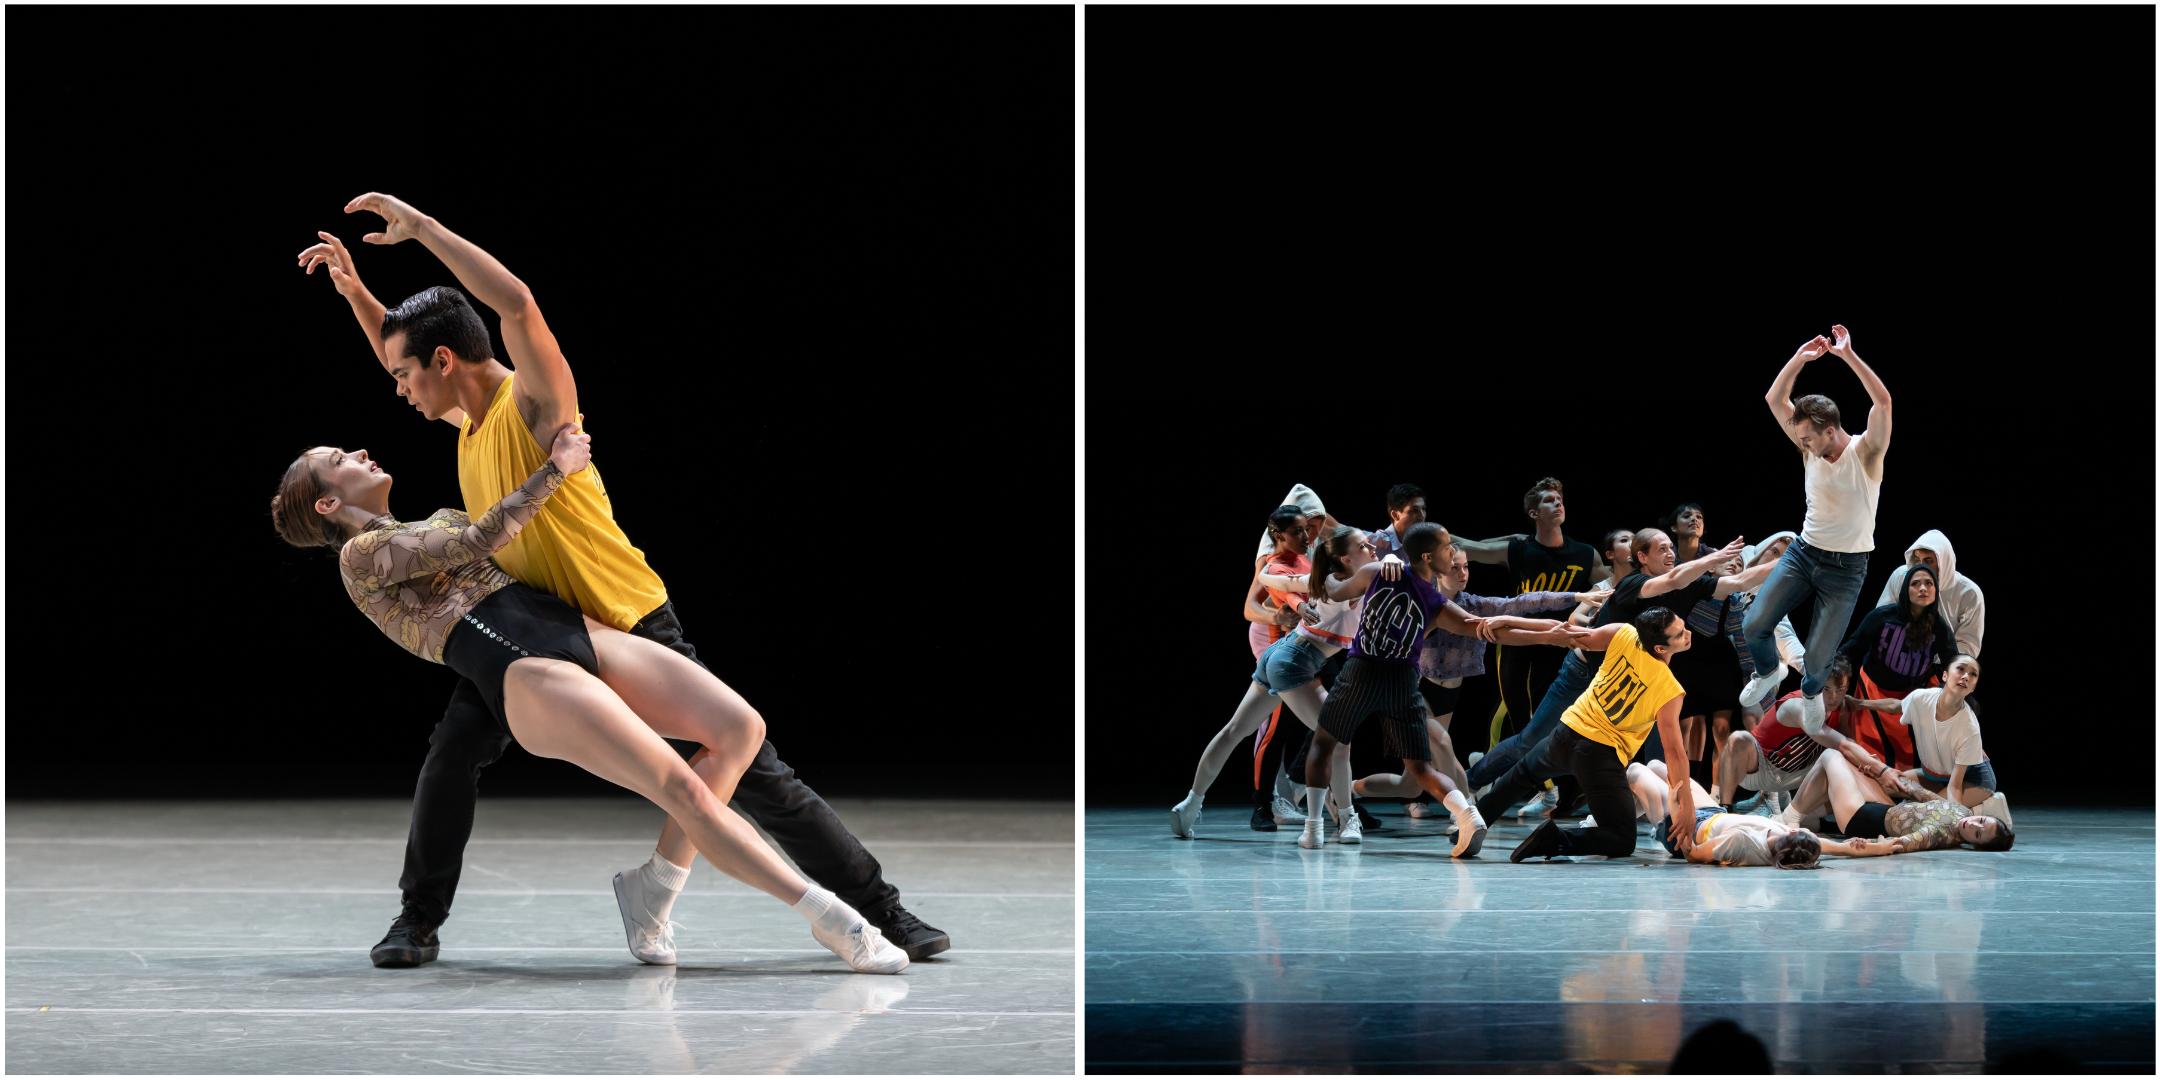 BalletMet performing The Times Are Racing by Justin Peck